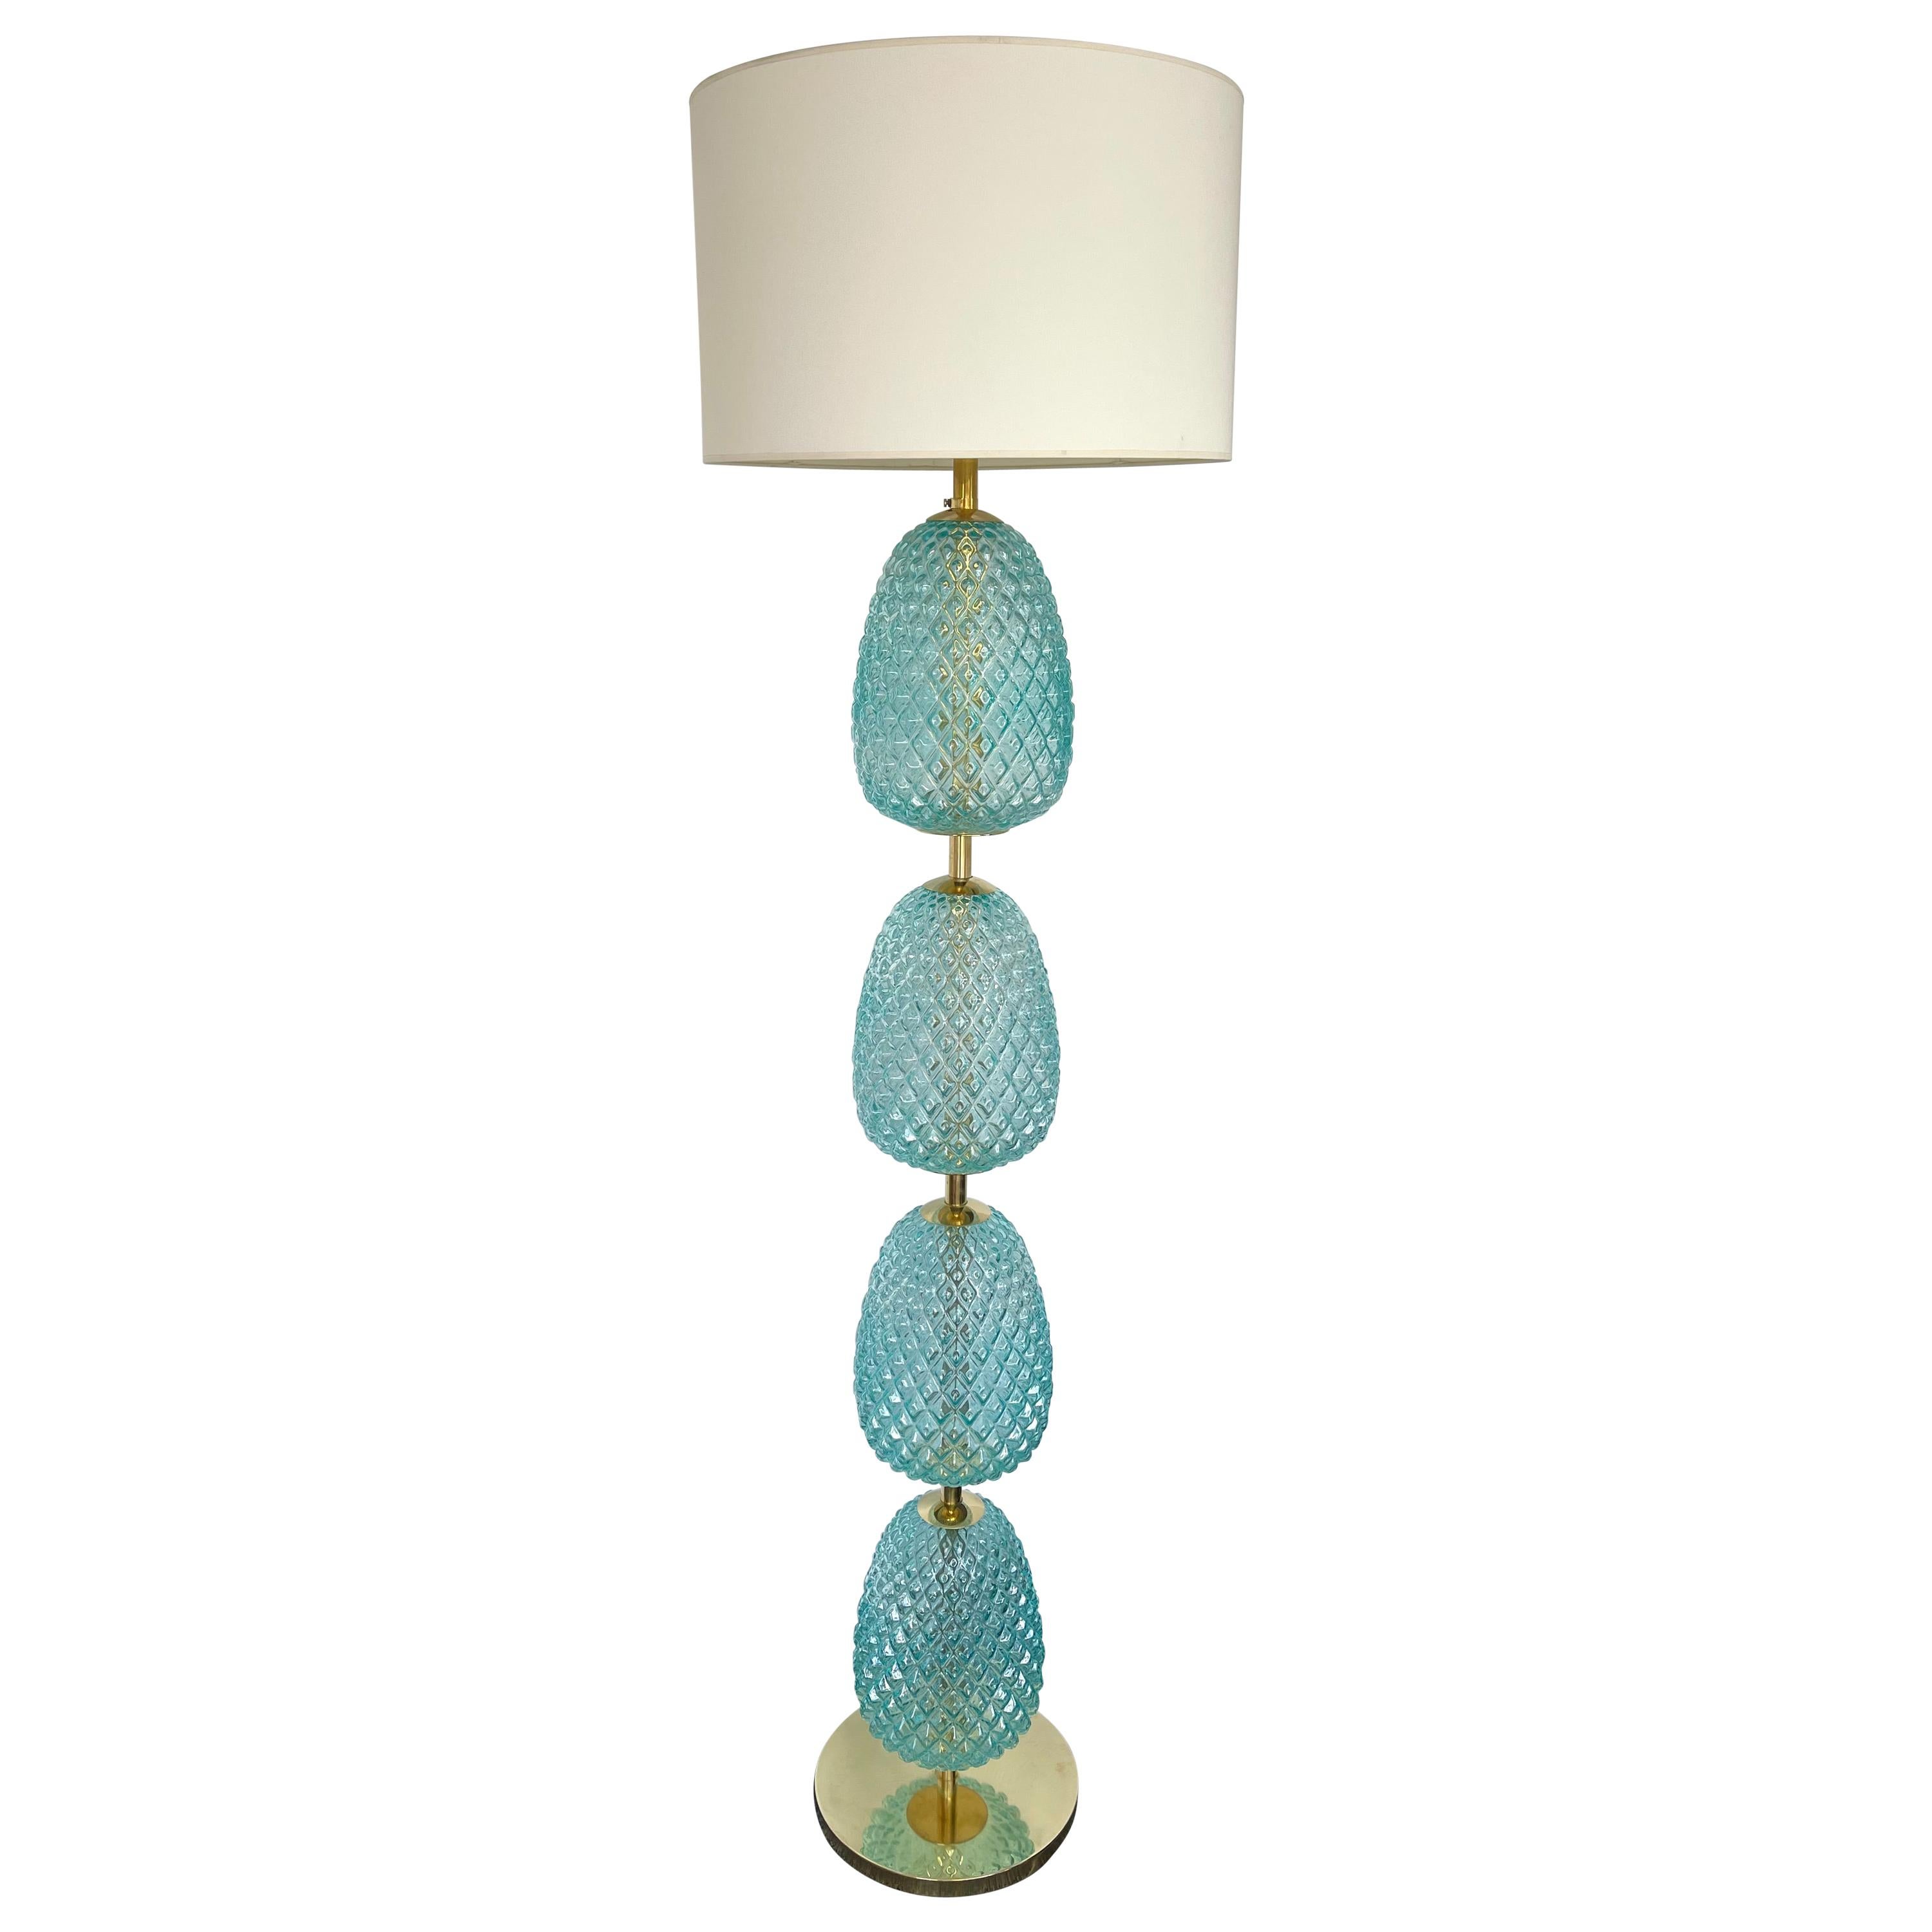 Contemporary Brass Pineapple Murano Glass Floor Lamp, Italy For Sale